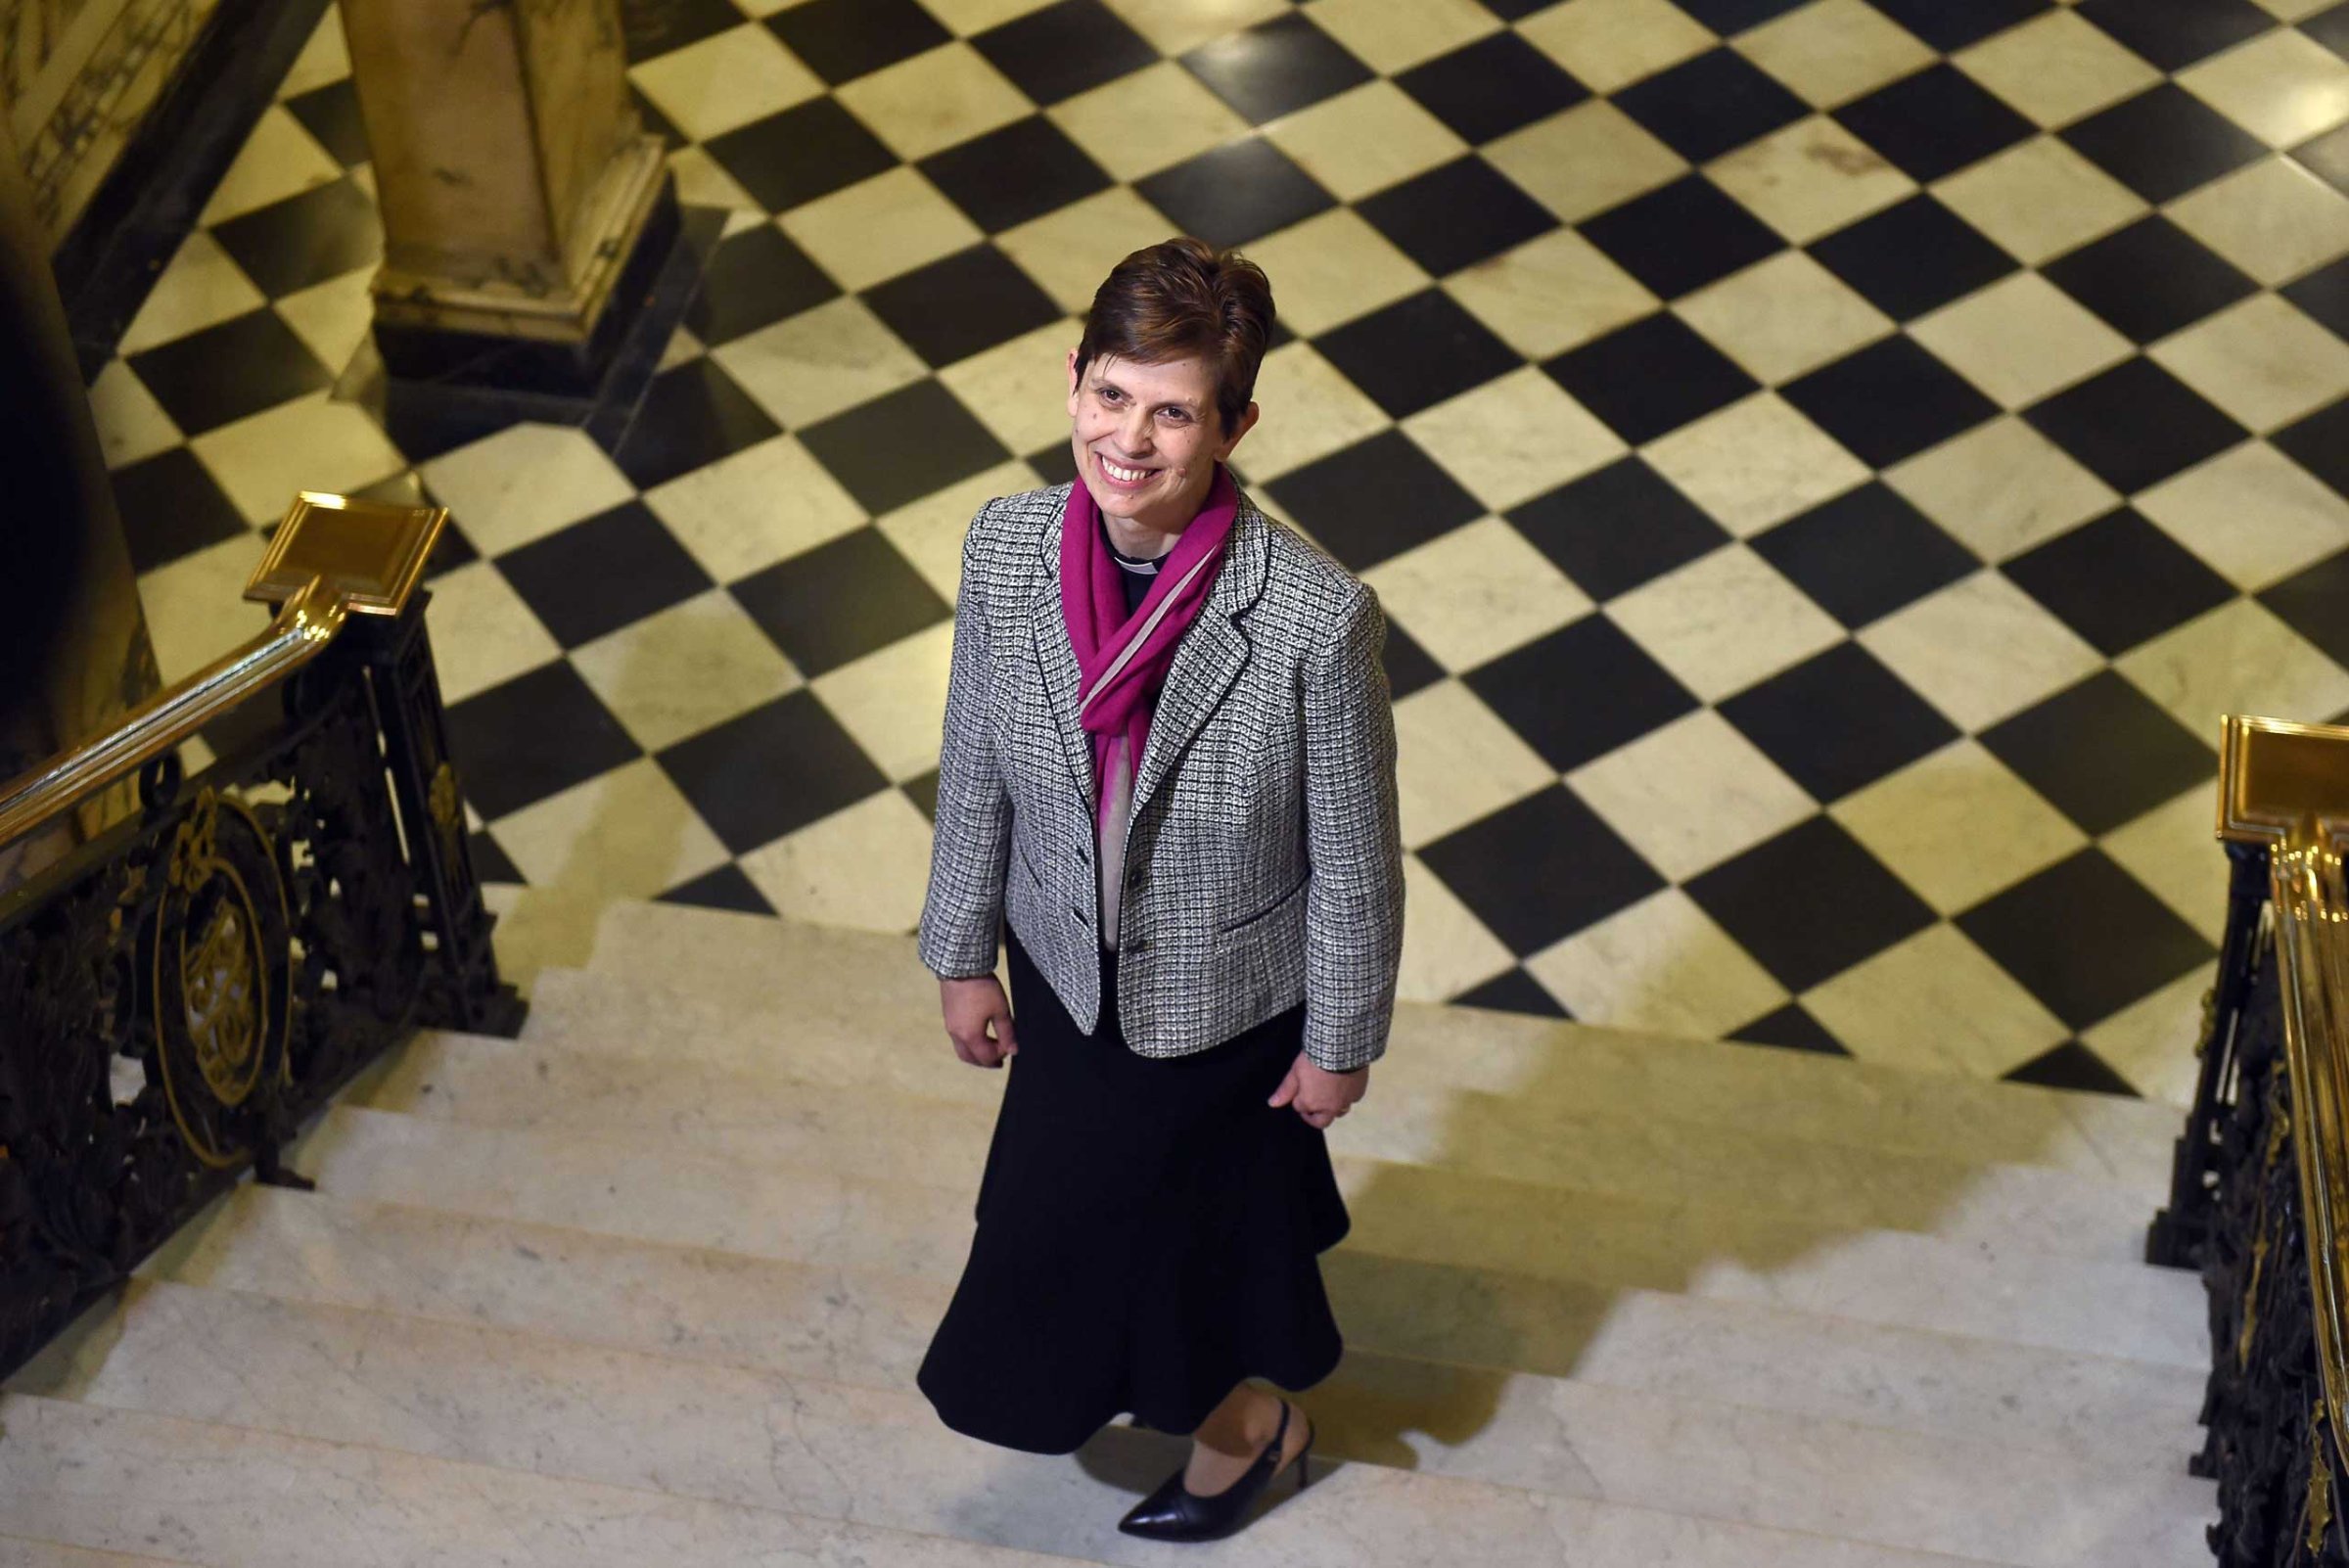 Reverend Libby Lane poses for pictures during a photo call following the announcement naming her first woman bishop by The Church of England, after a historic change in its rules, in Stockport, northwest England, on Dec. 17, 2014.